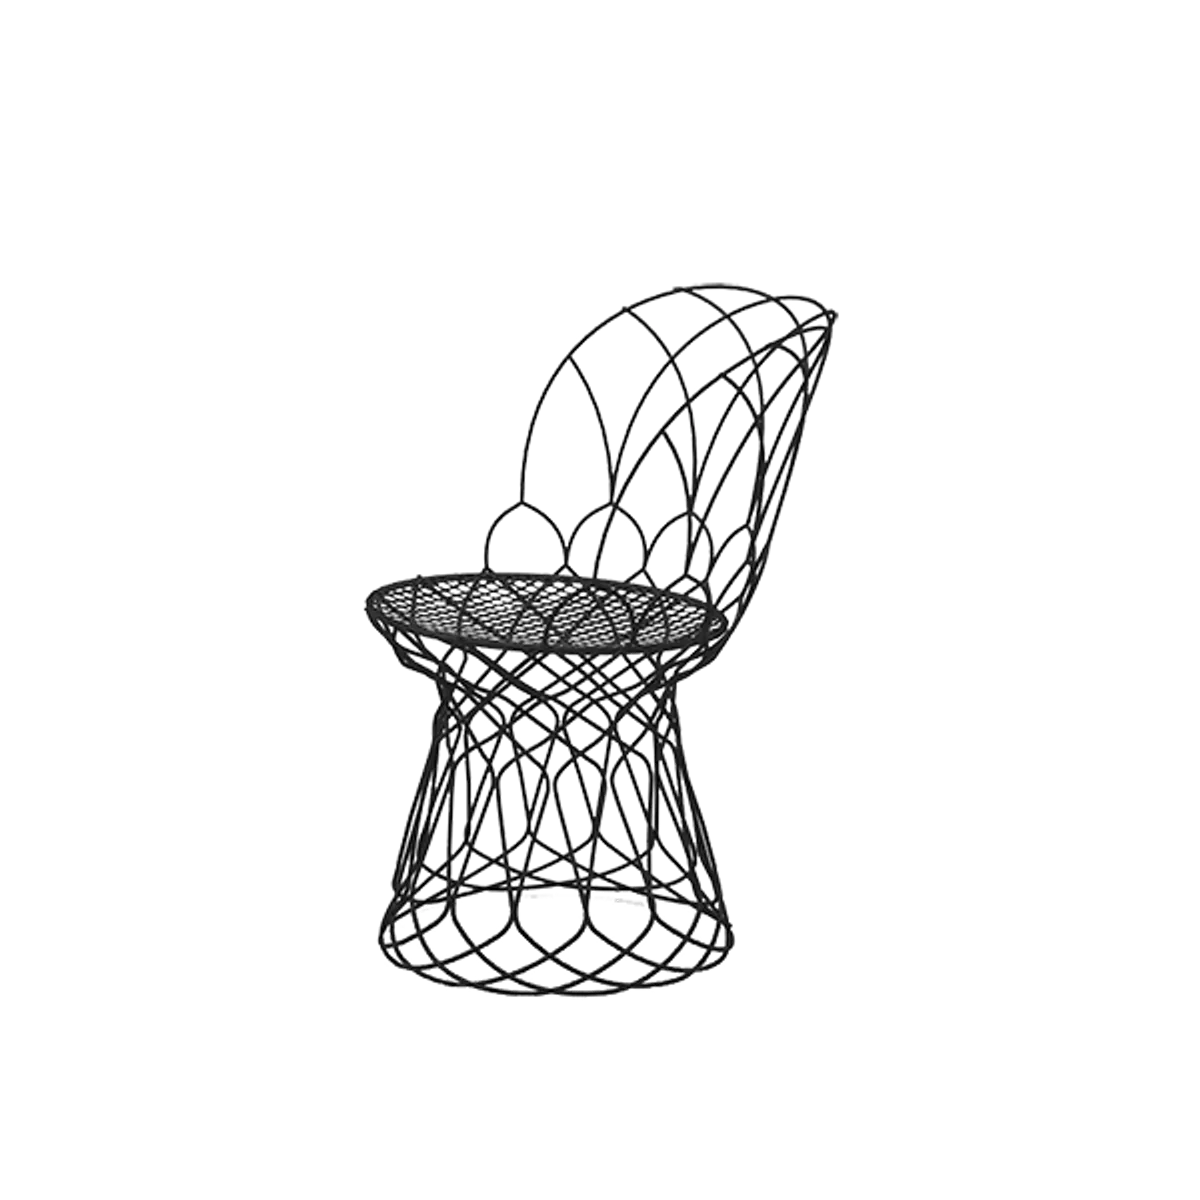 Web Re Trouve Chair For Hospitality Exteriors 020